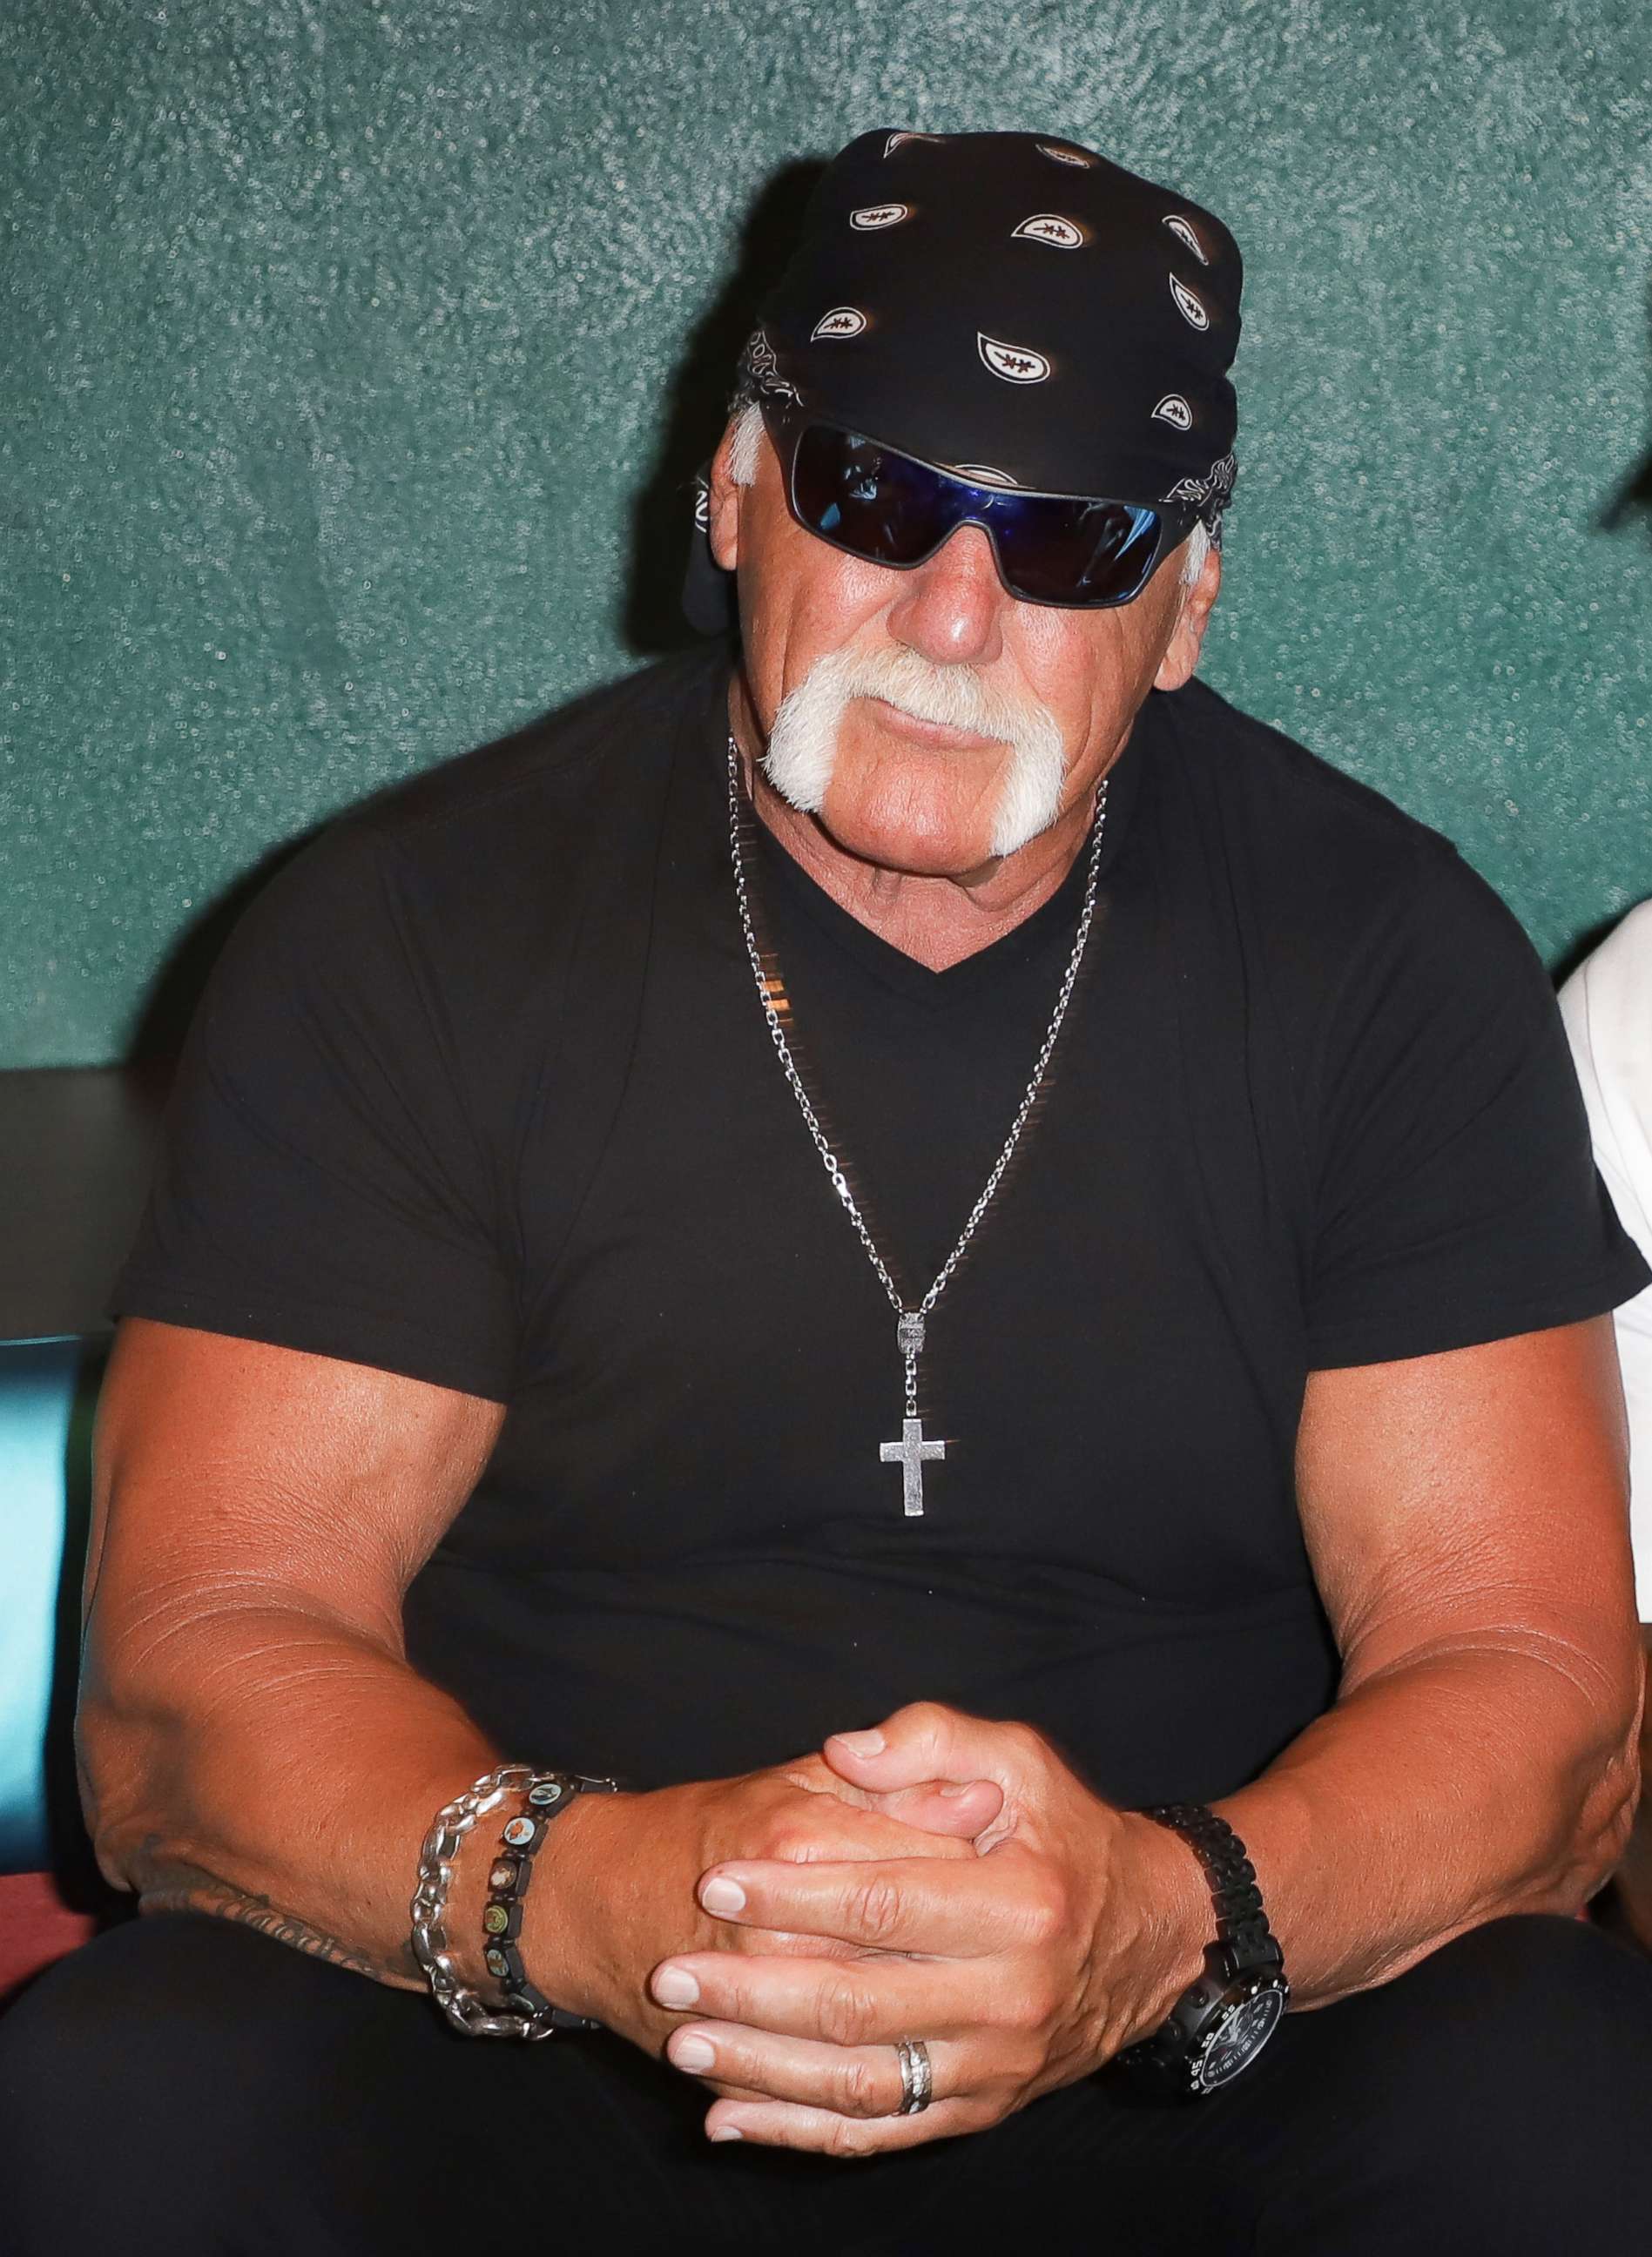 PHOTO: Hulk Hogan attends Celebrity Sports Agent Darren Prince's Private Event For His New Best Selling Book 'Aiming High', October 8, 2018, in Miami.